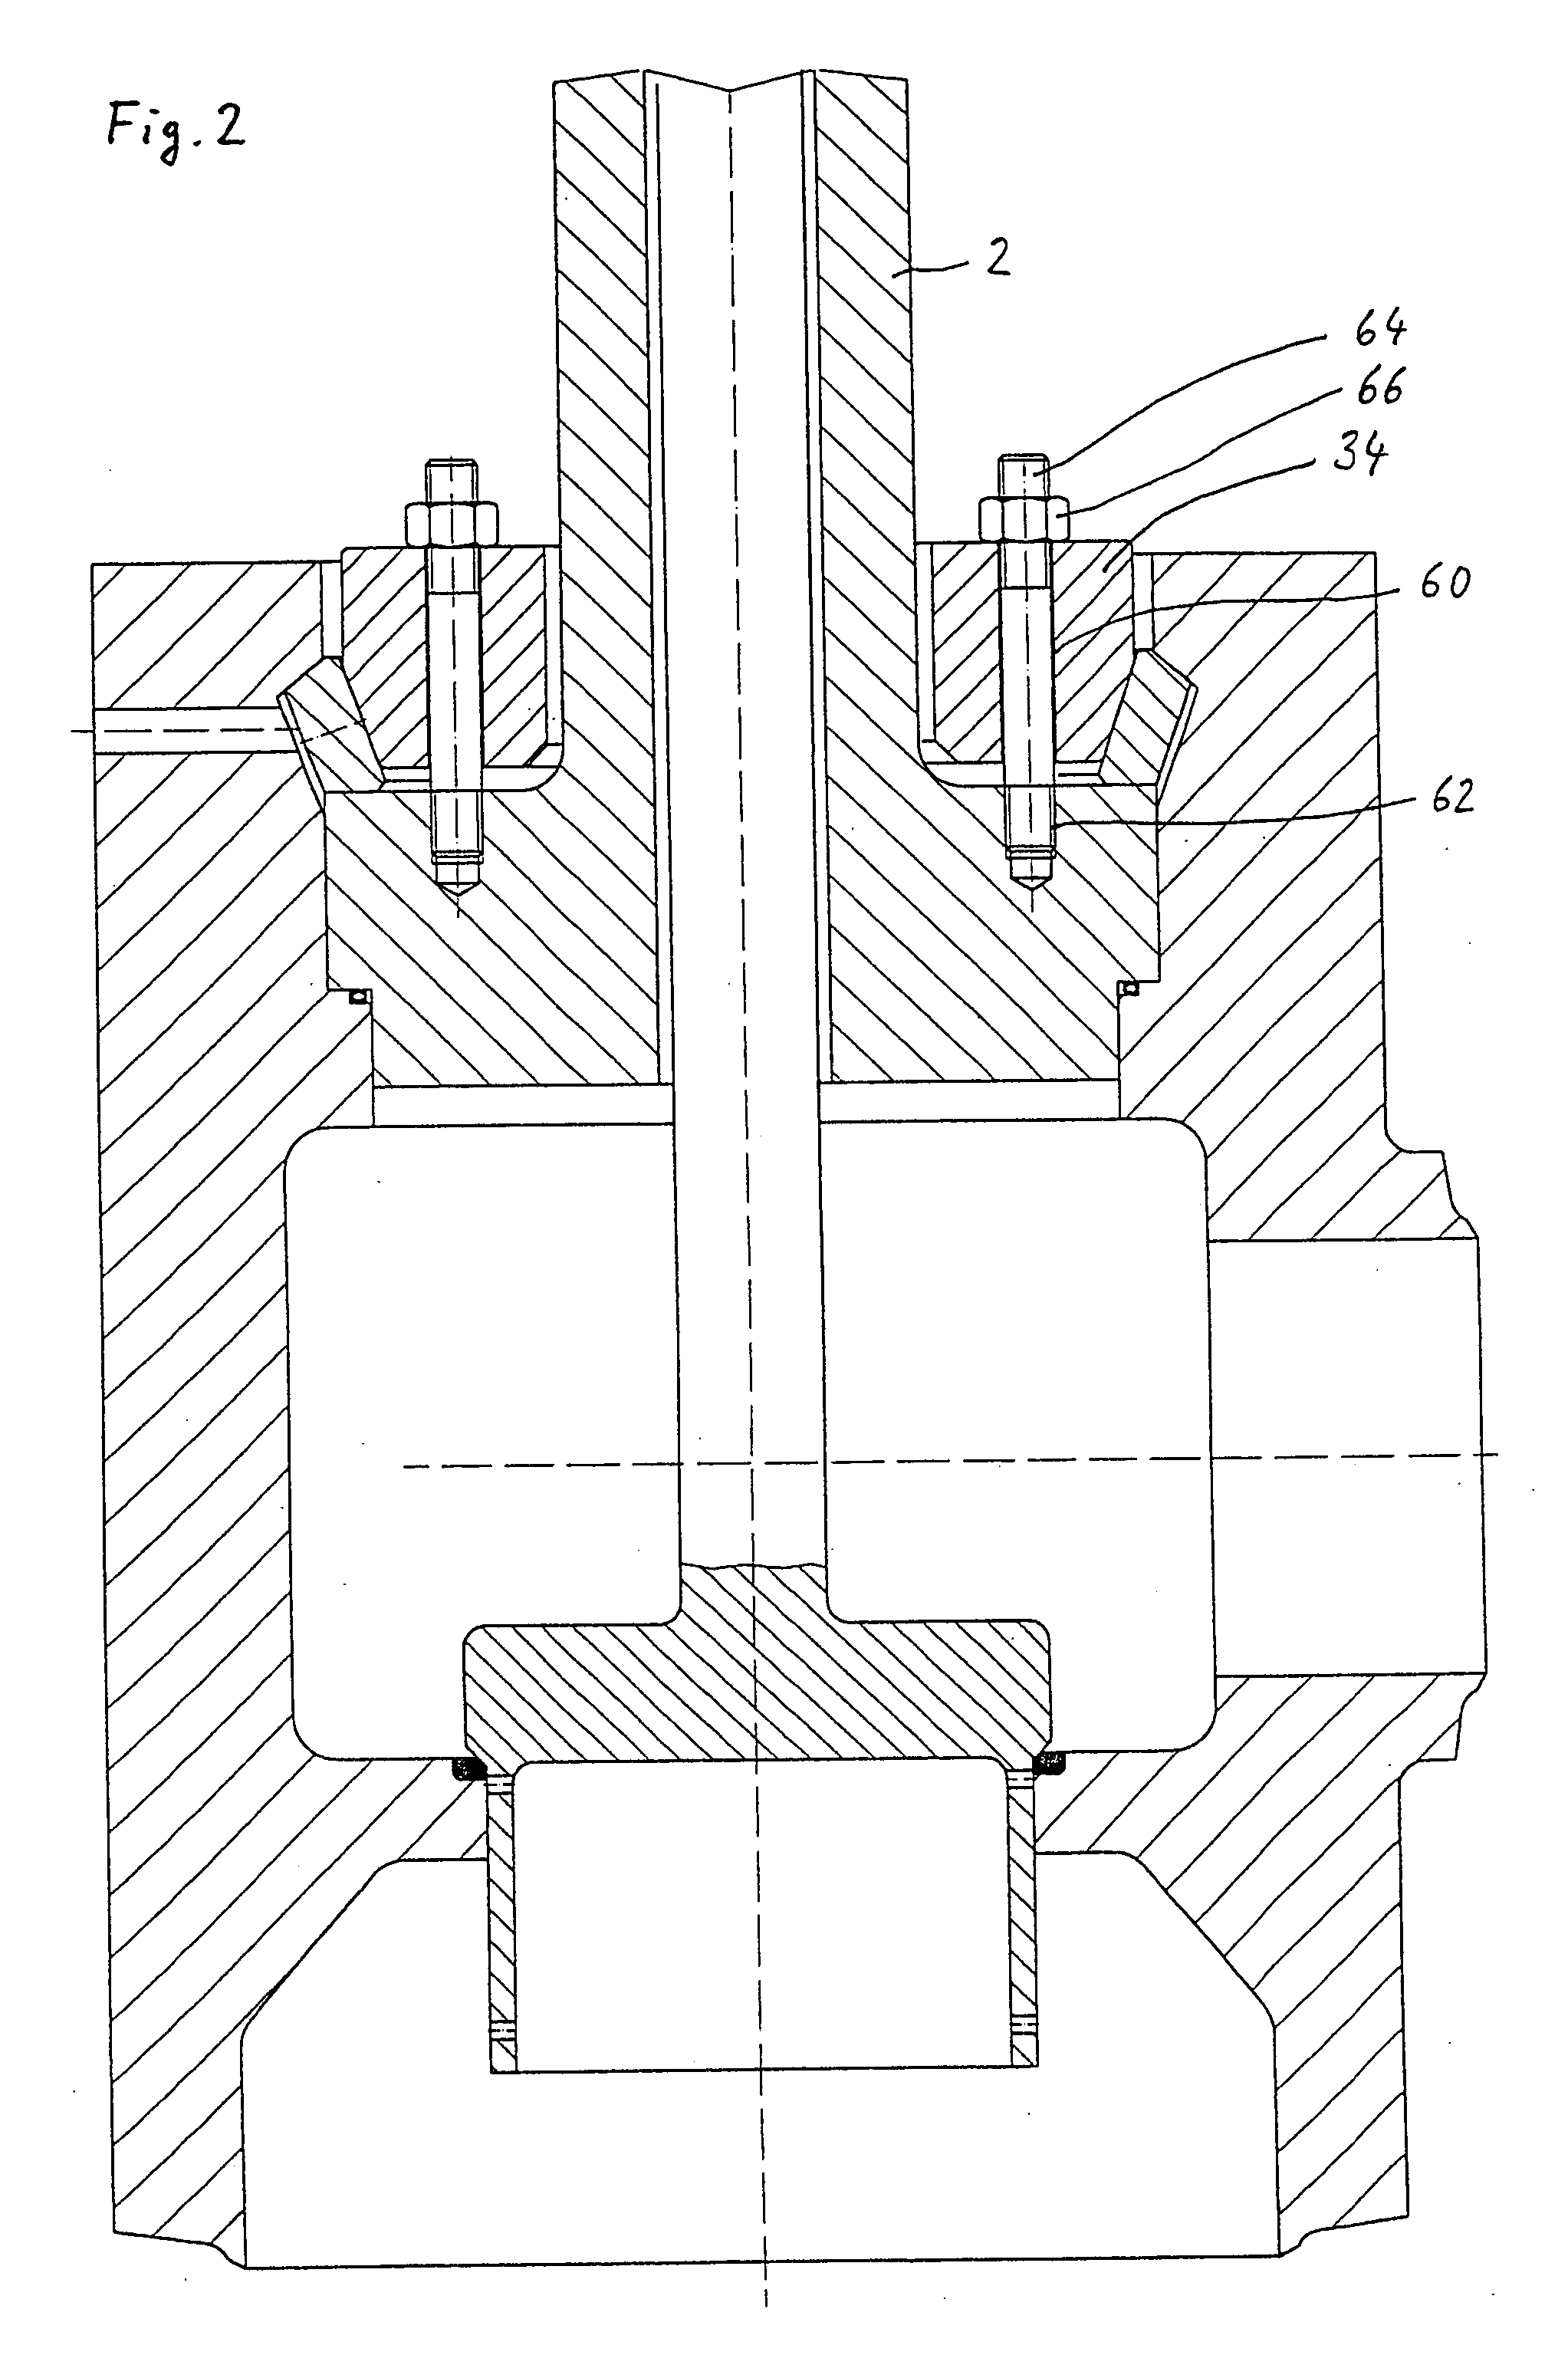 Releasable connection arrangement for two rotationally symmetrical components